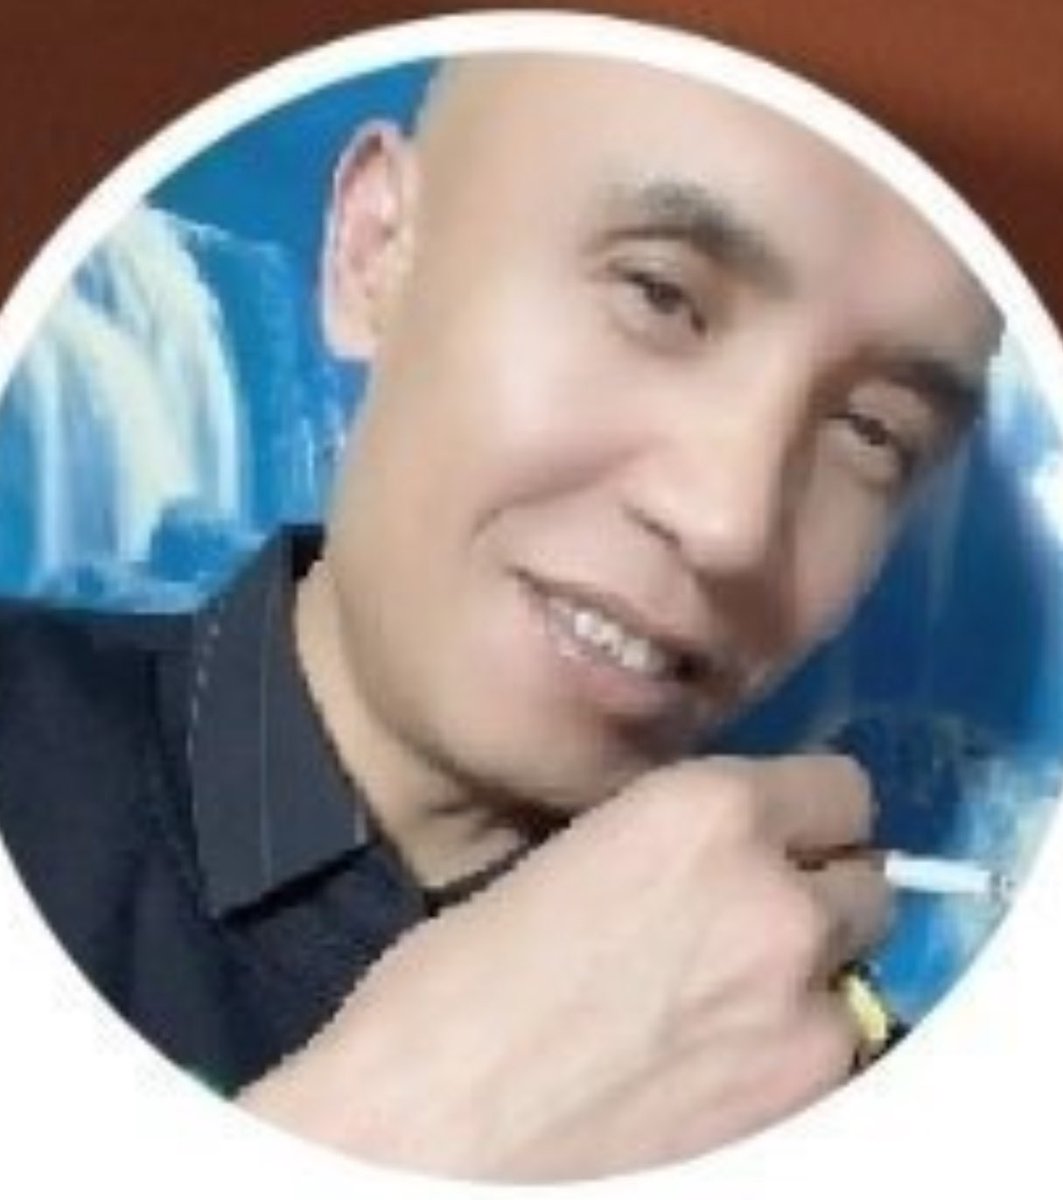 “4-mon-old puppy”, “8-mon-old boy”.
Do you think this is a pet blogger? No, this man broadcasts live videos of the slaughter of dogs & sells dog meat.
There are many such accounts in China. This is the function of China’s firewall. #China doesn‘t want the world to see the truth.